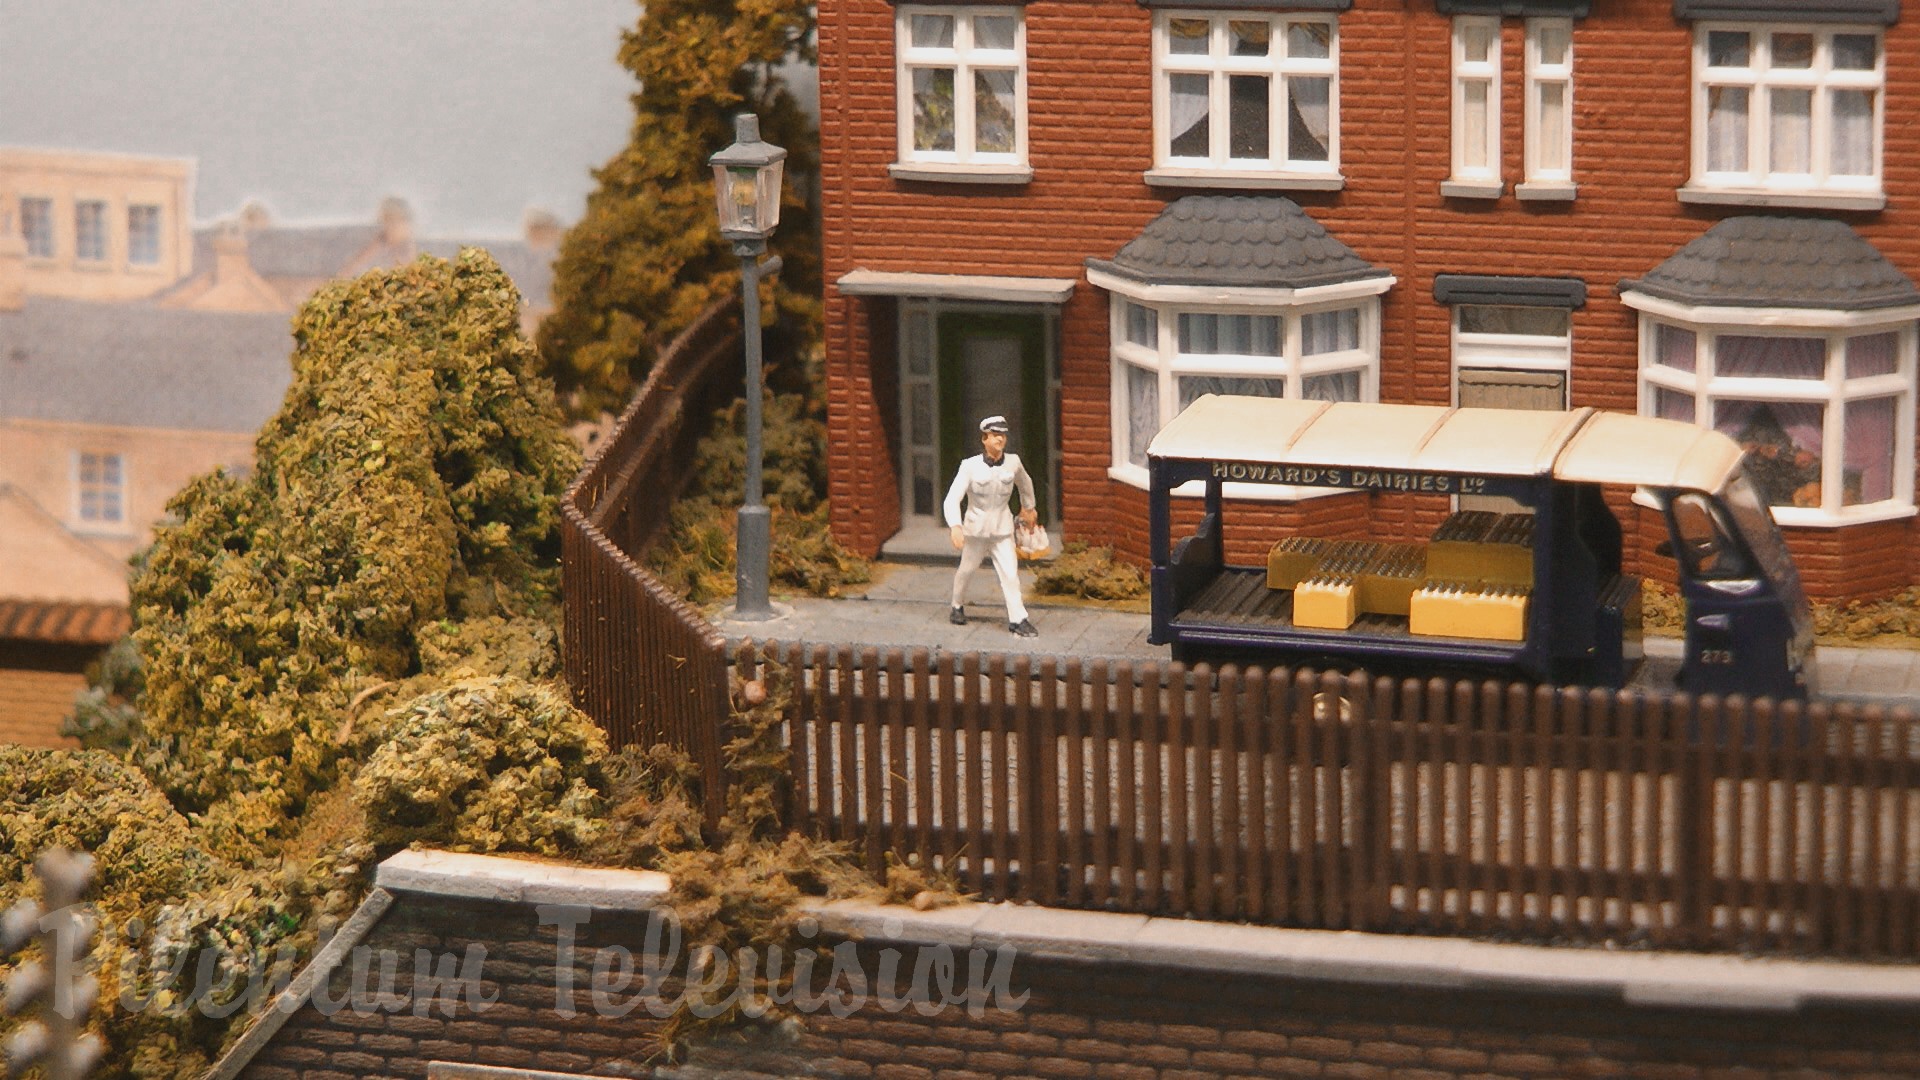 One of the most beautiful British model railway micro layouts of British Railways (GWR) in OO scale